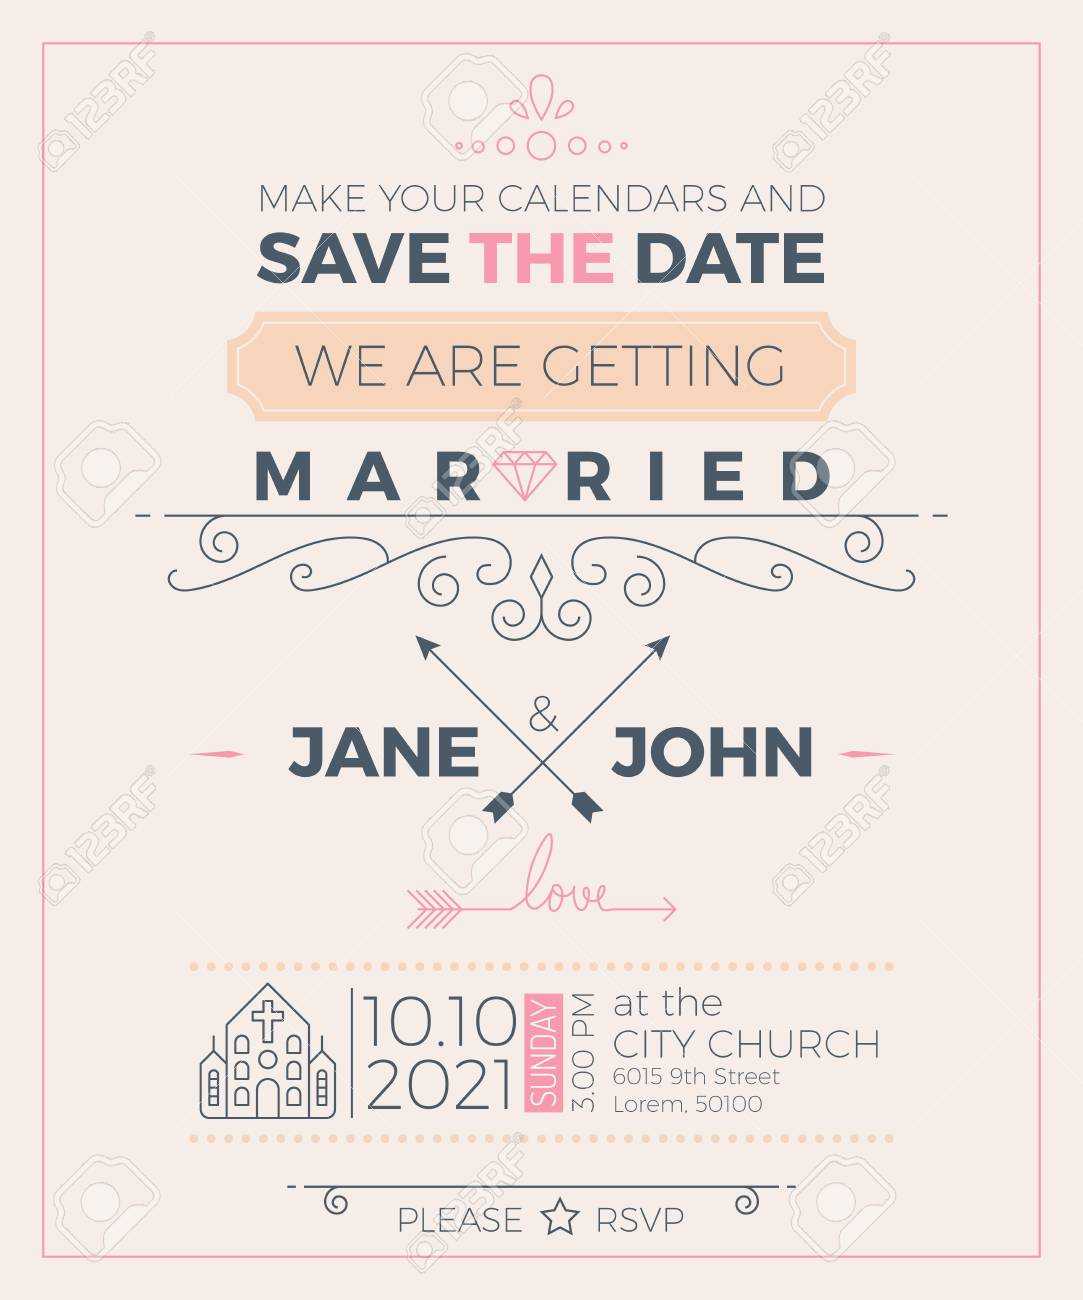 Vintage Wedding Invitation Card Template With Clean & Simple.. With Regard To Church Invite Cards Template